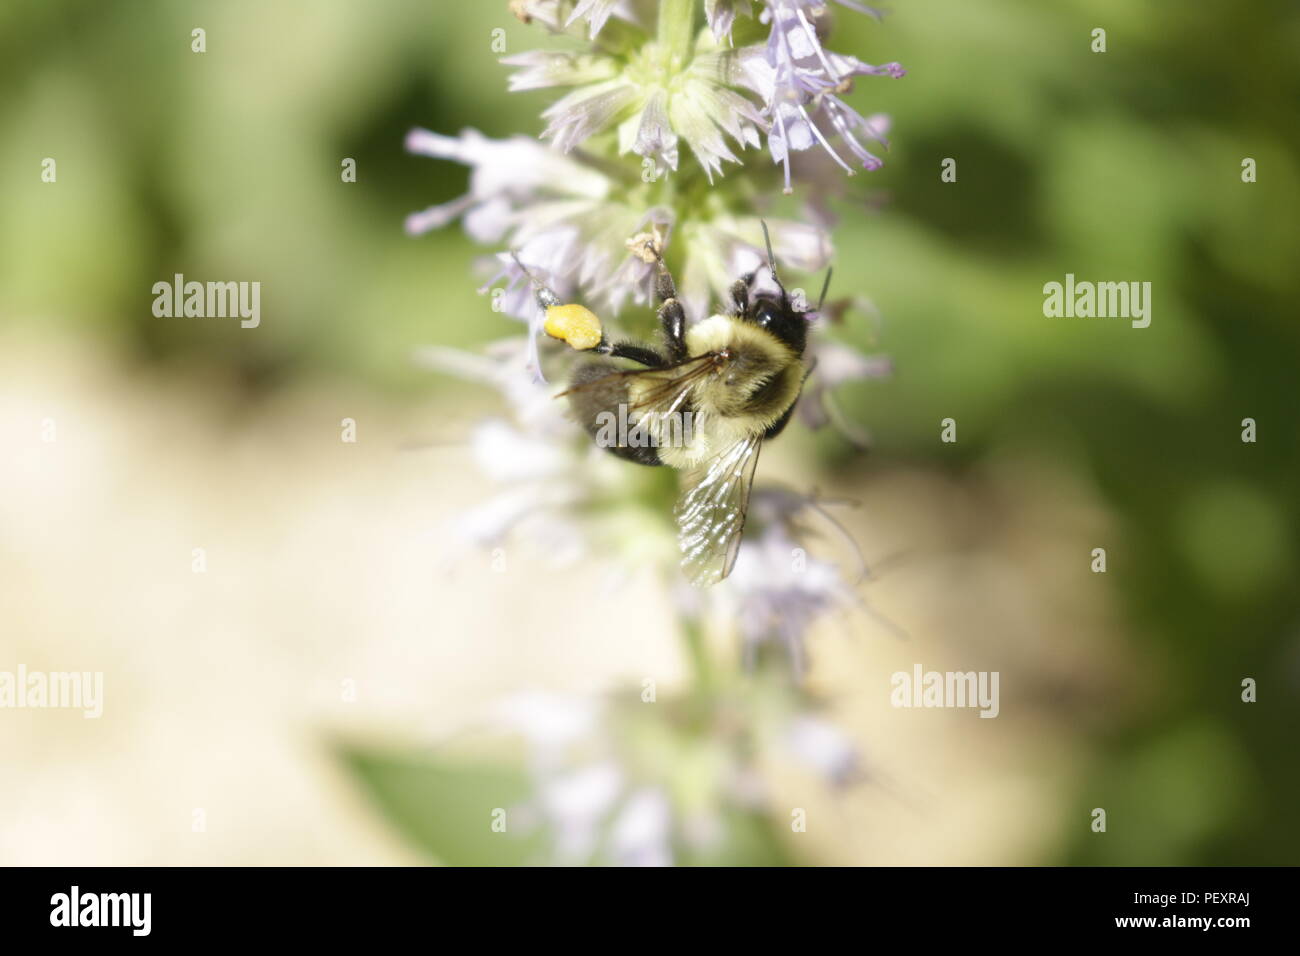 honey bee pollinating a licorice mint plant. Licorice mint is used for medicinal and other teas.. Stock Photo